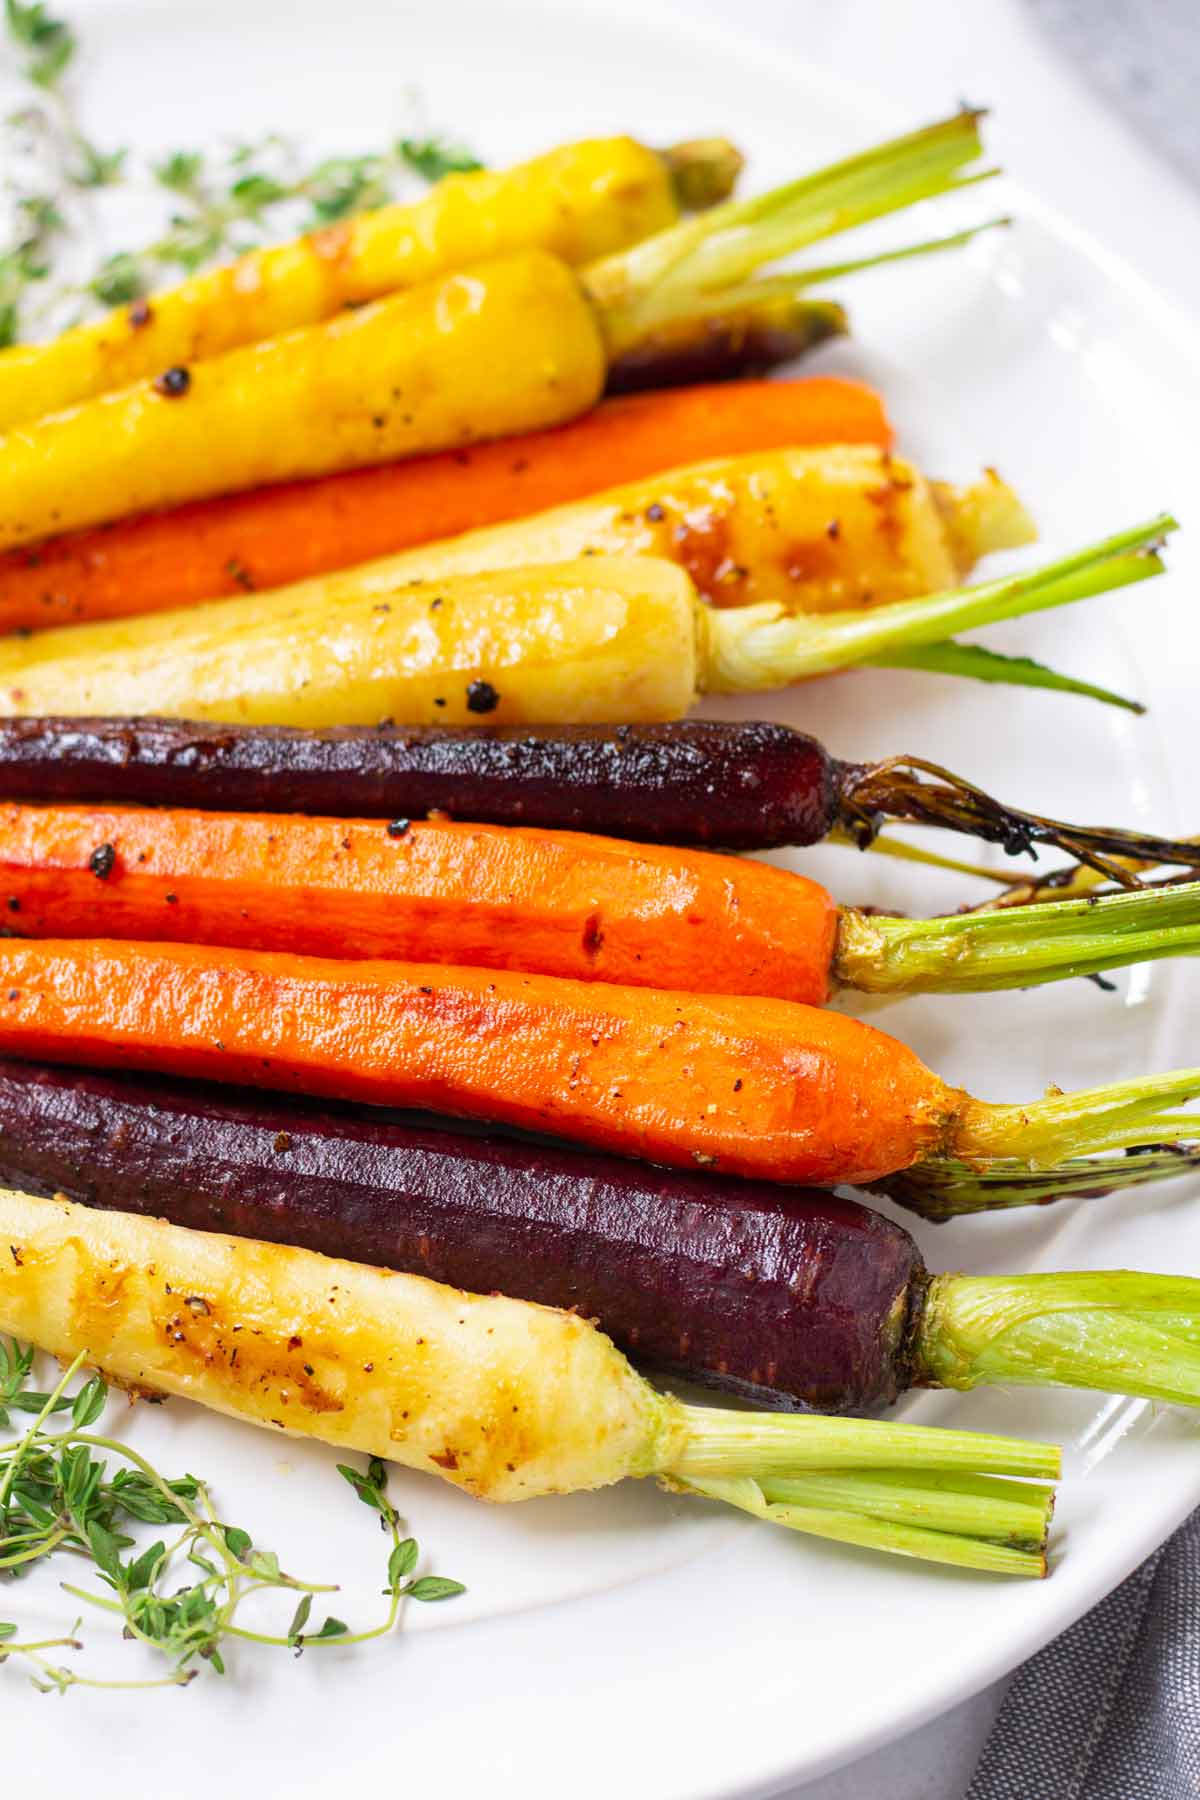 side view of roasted rainbow carrots with seasoning and glaze